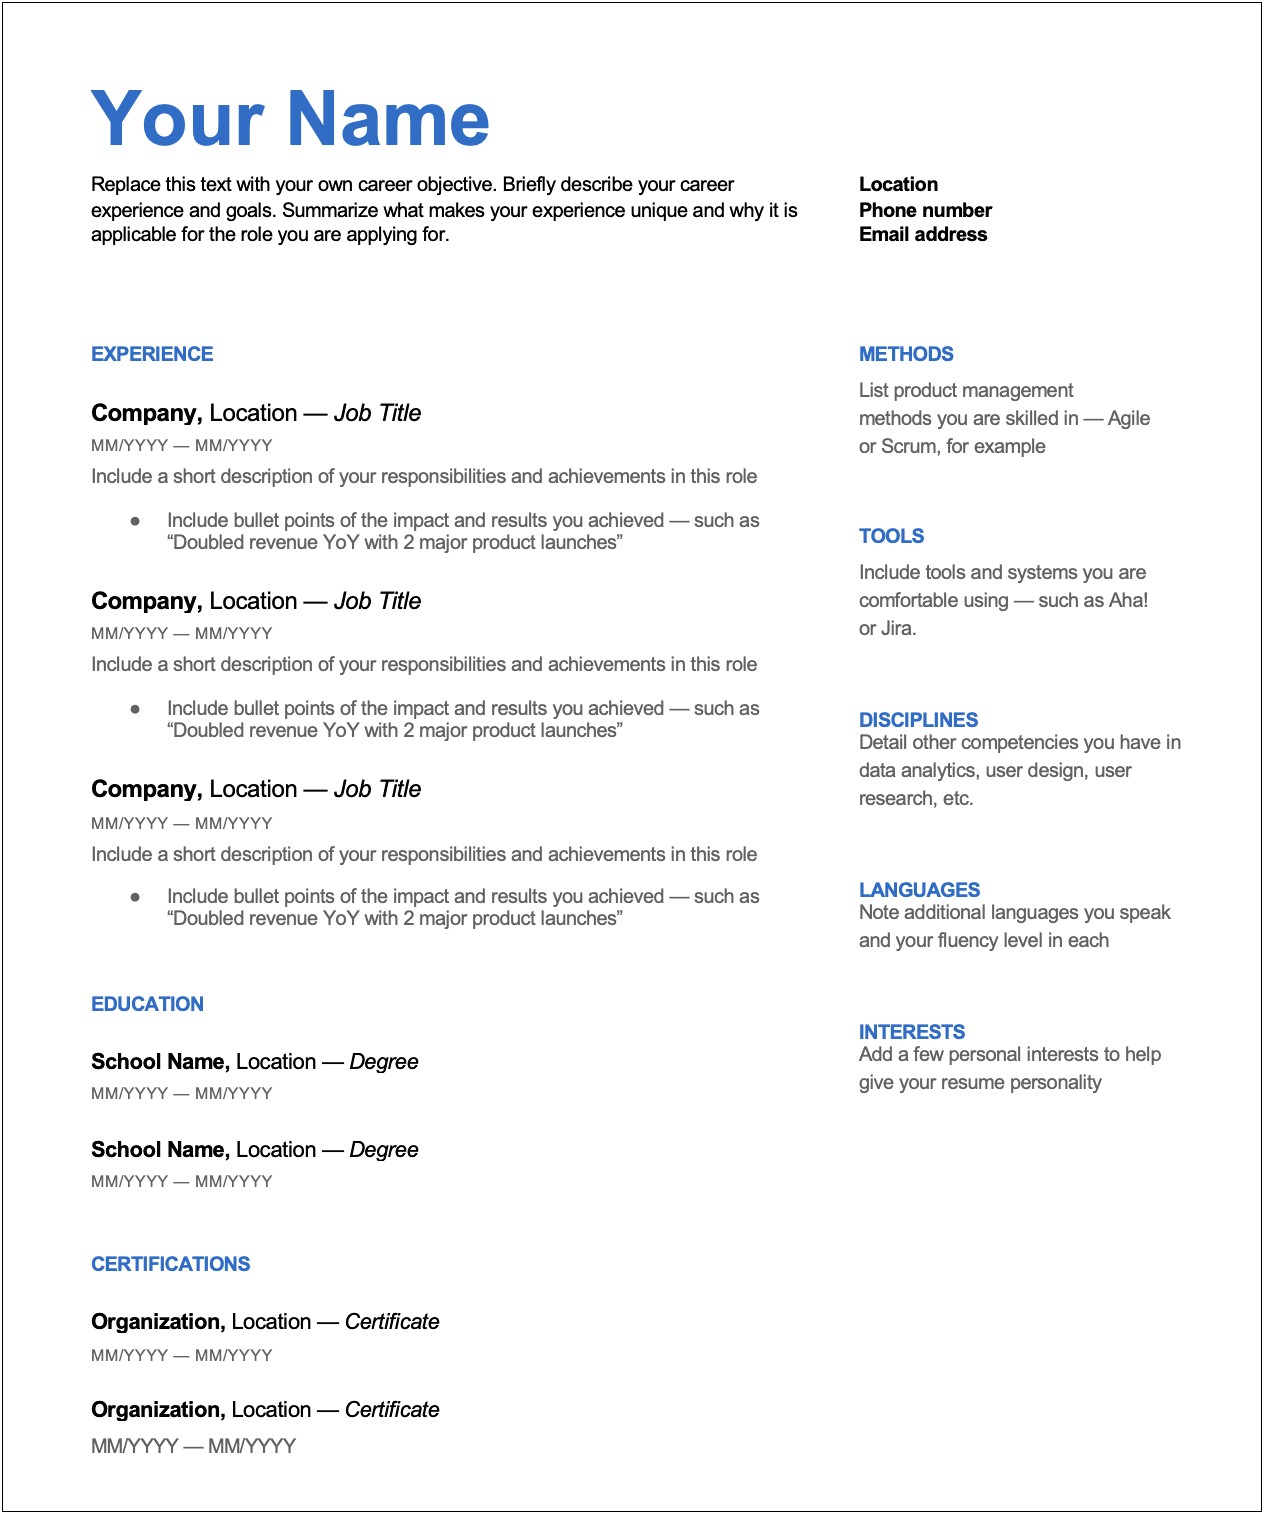 Different Job Titles In A Company Resume